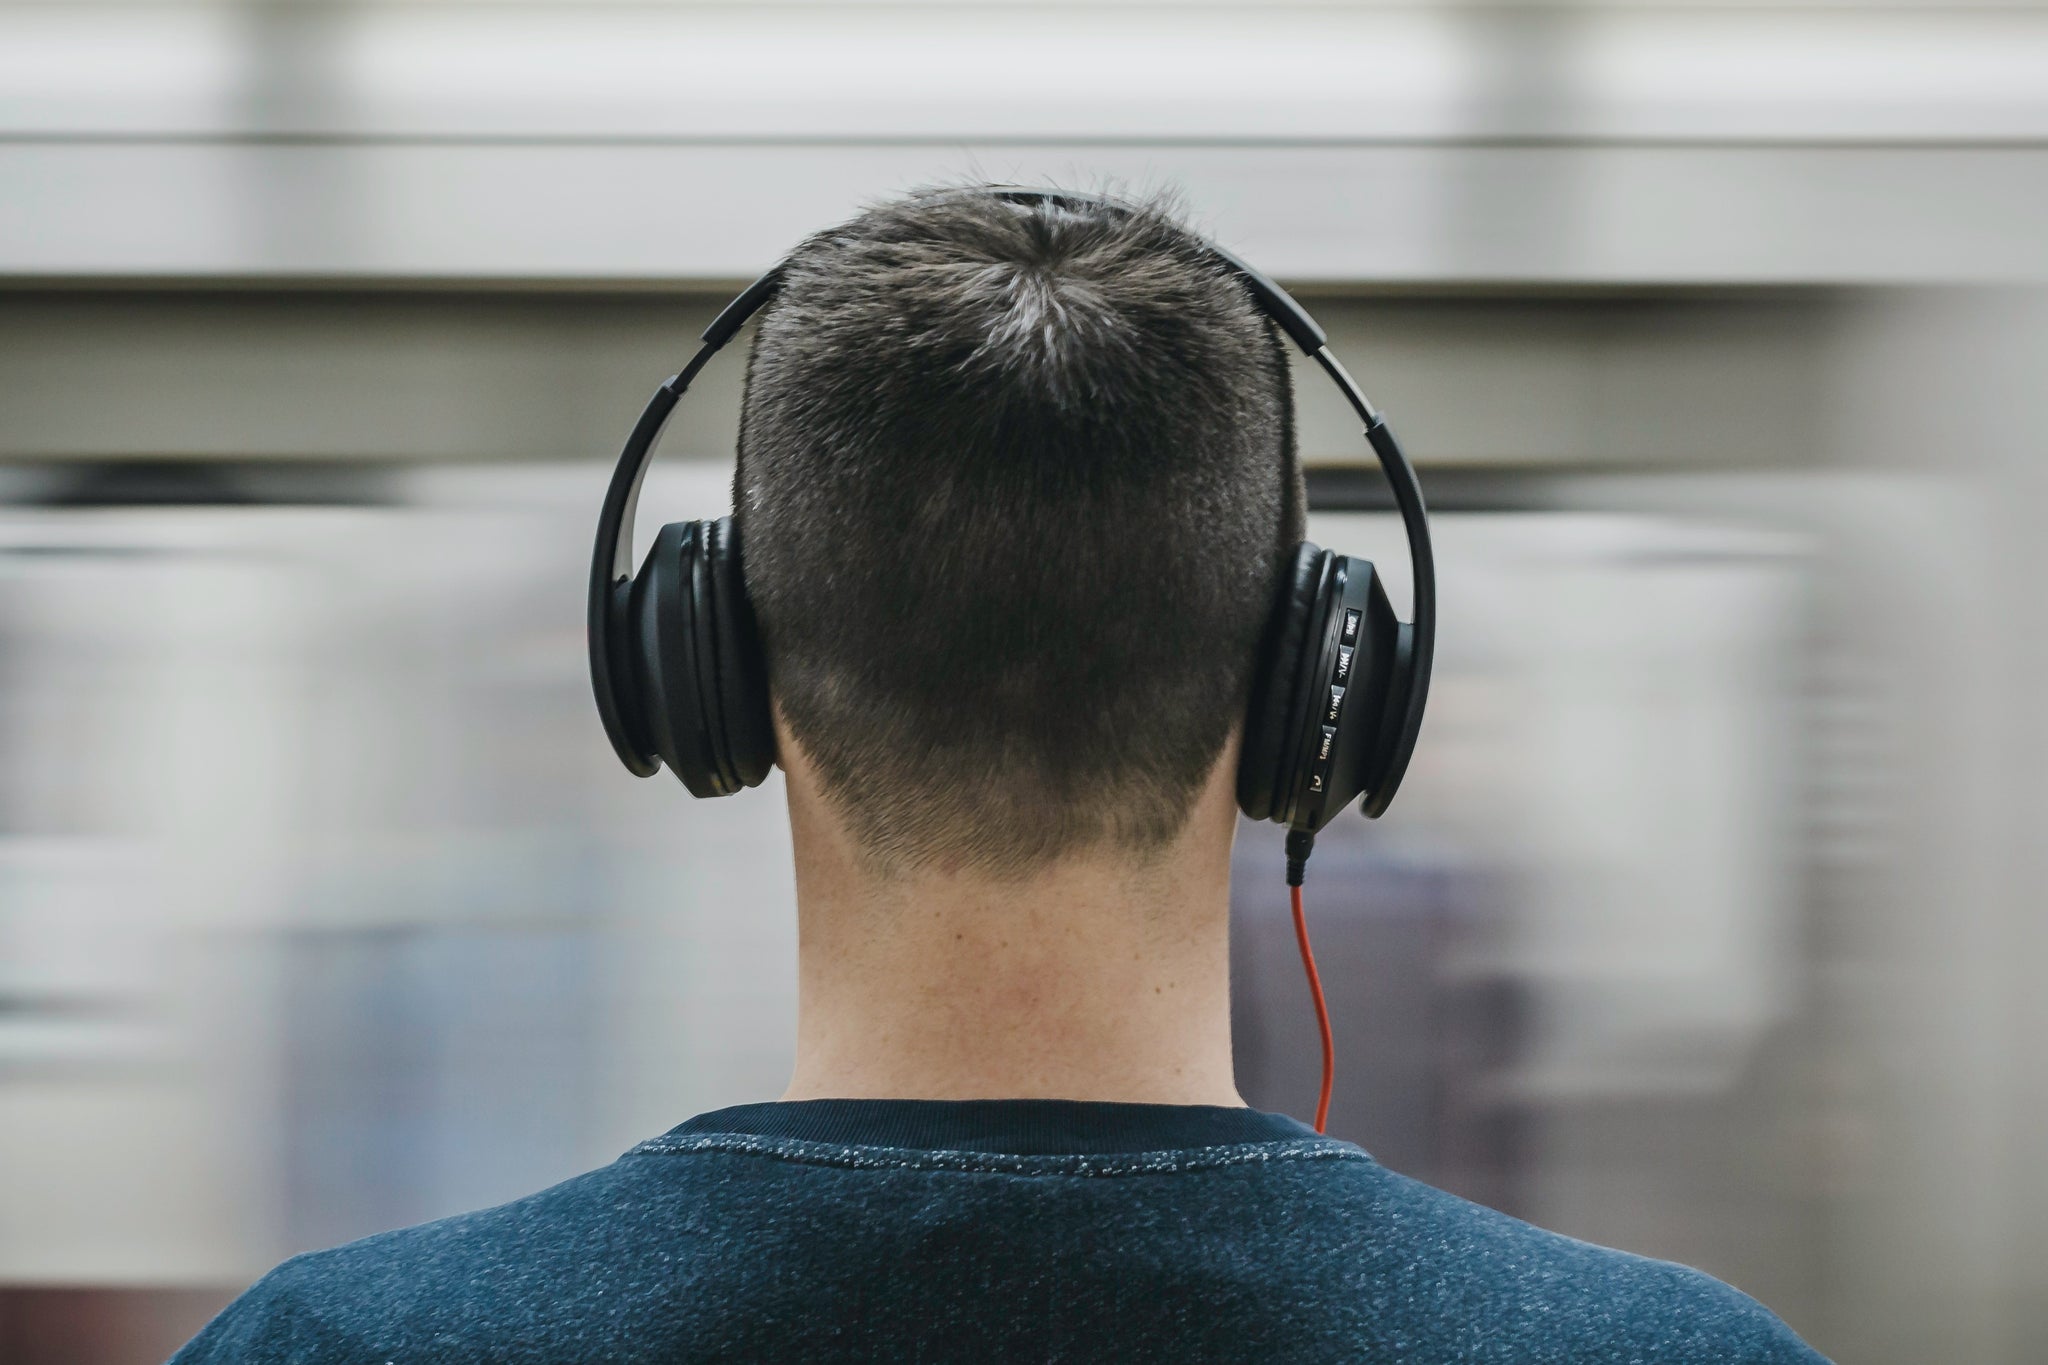 How Listening to Loud Music Can Cost You 750 Billion